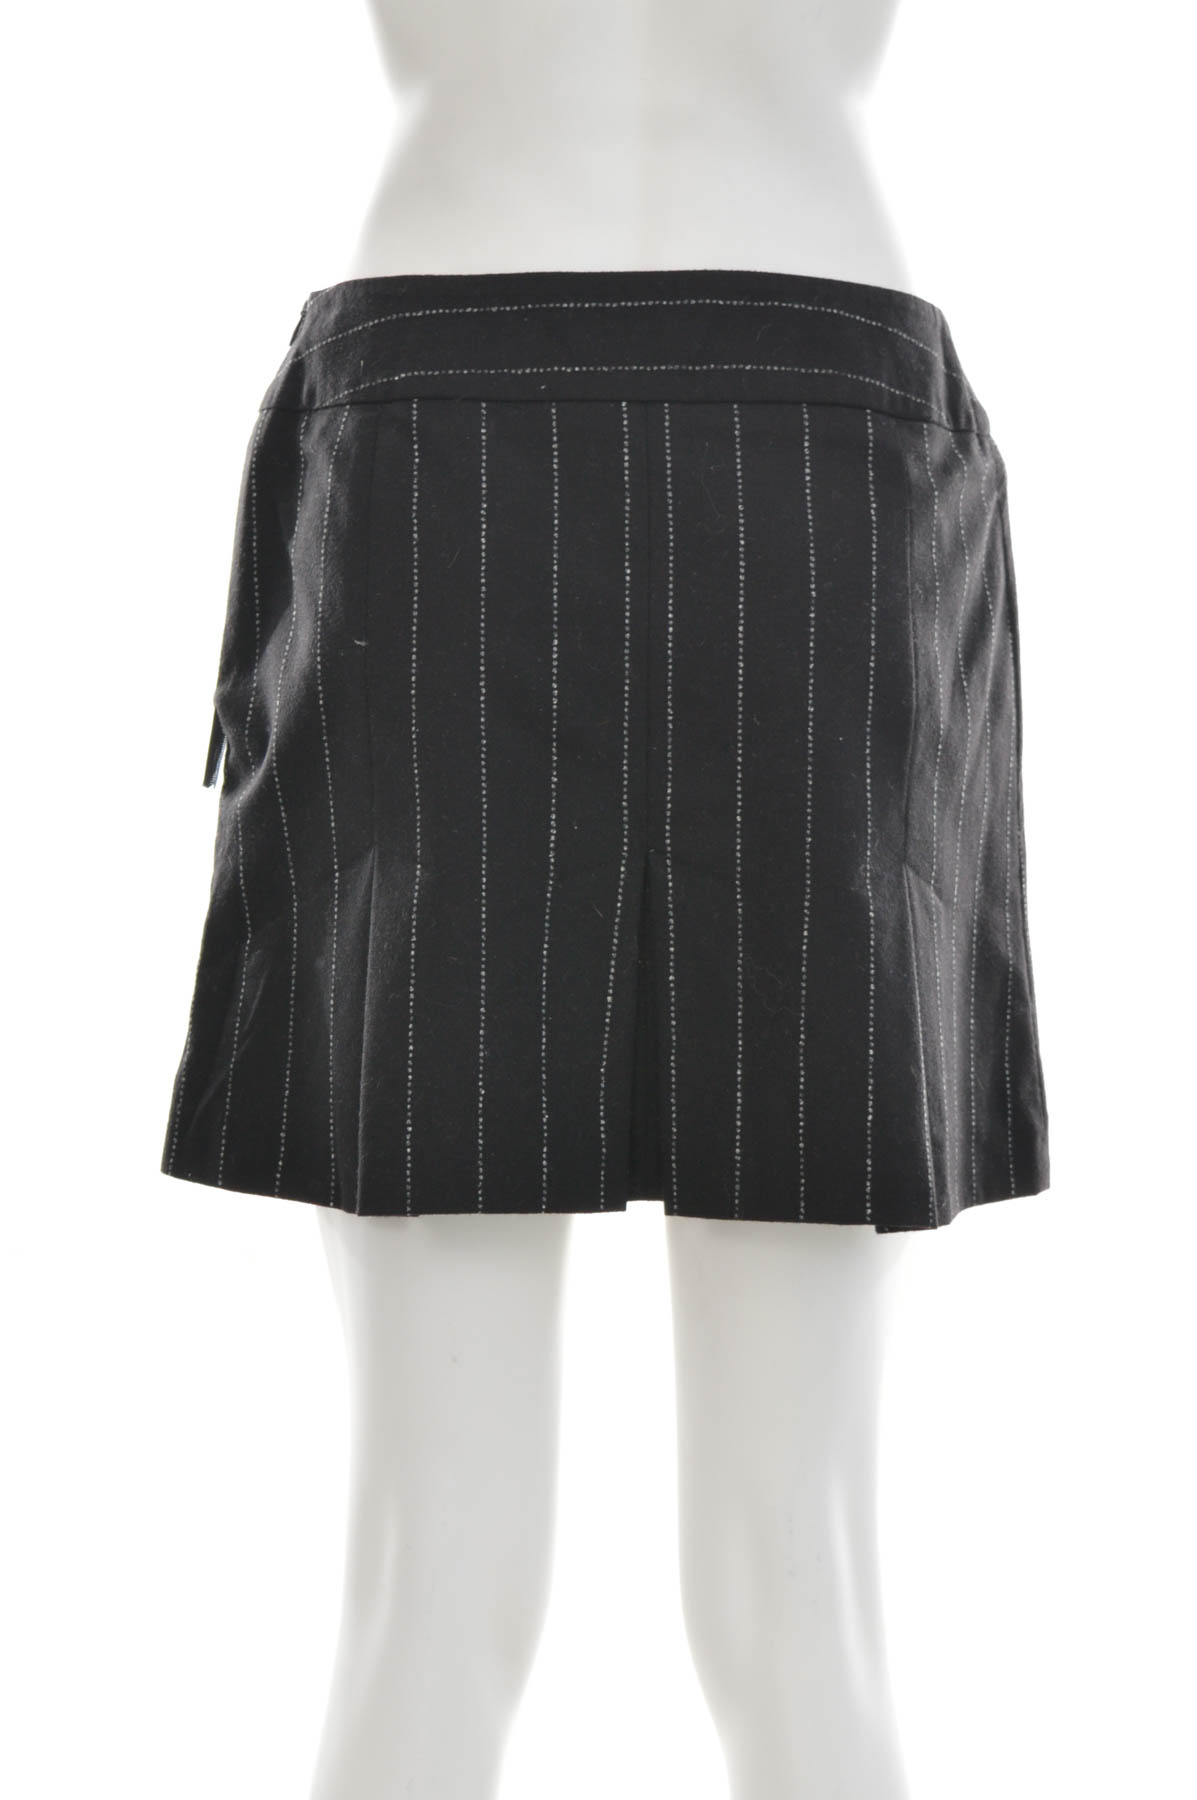 Skirt - Claudia Strater - 1